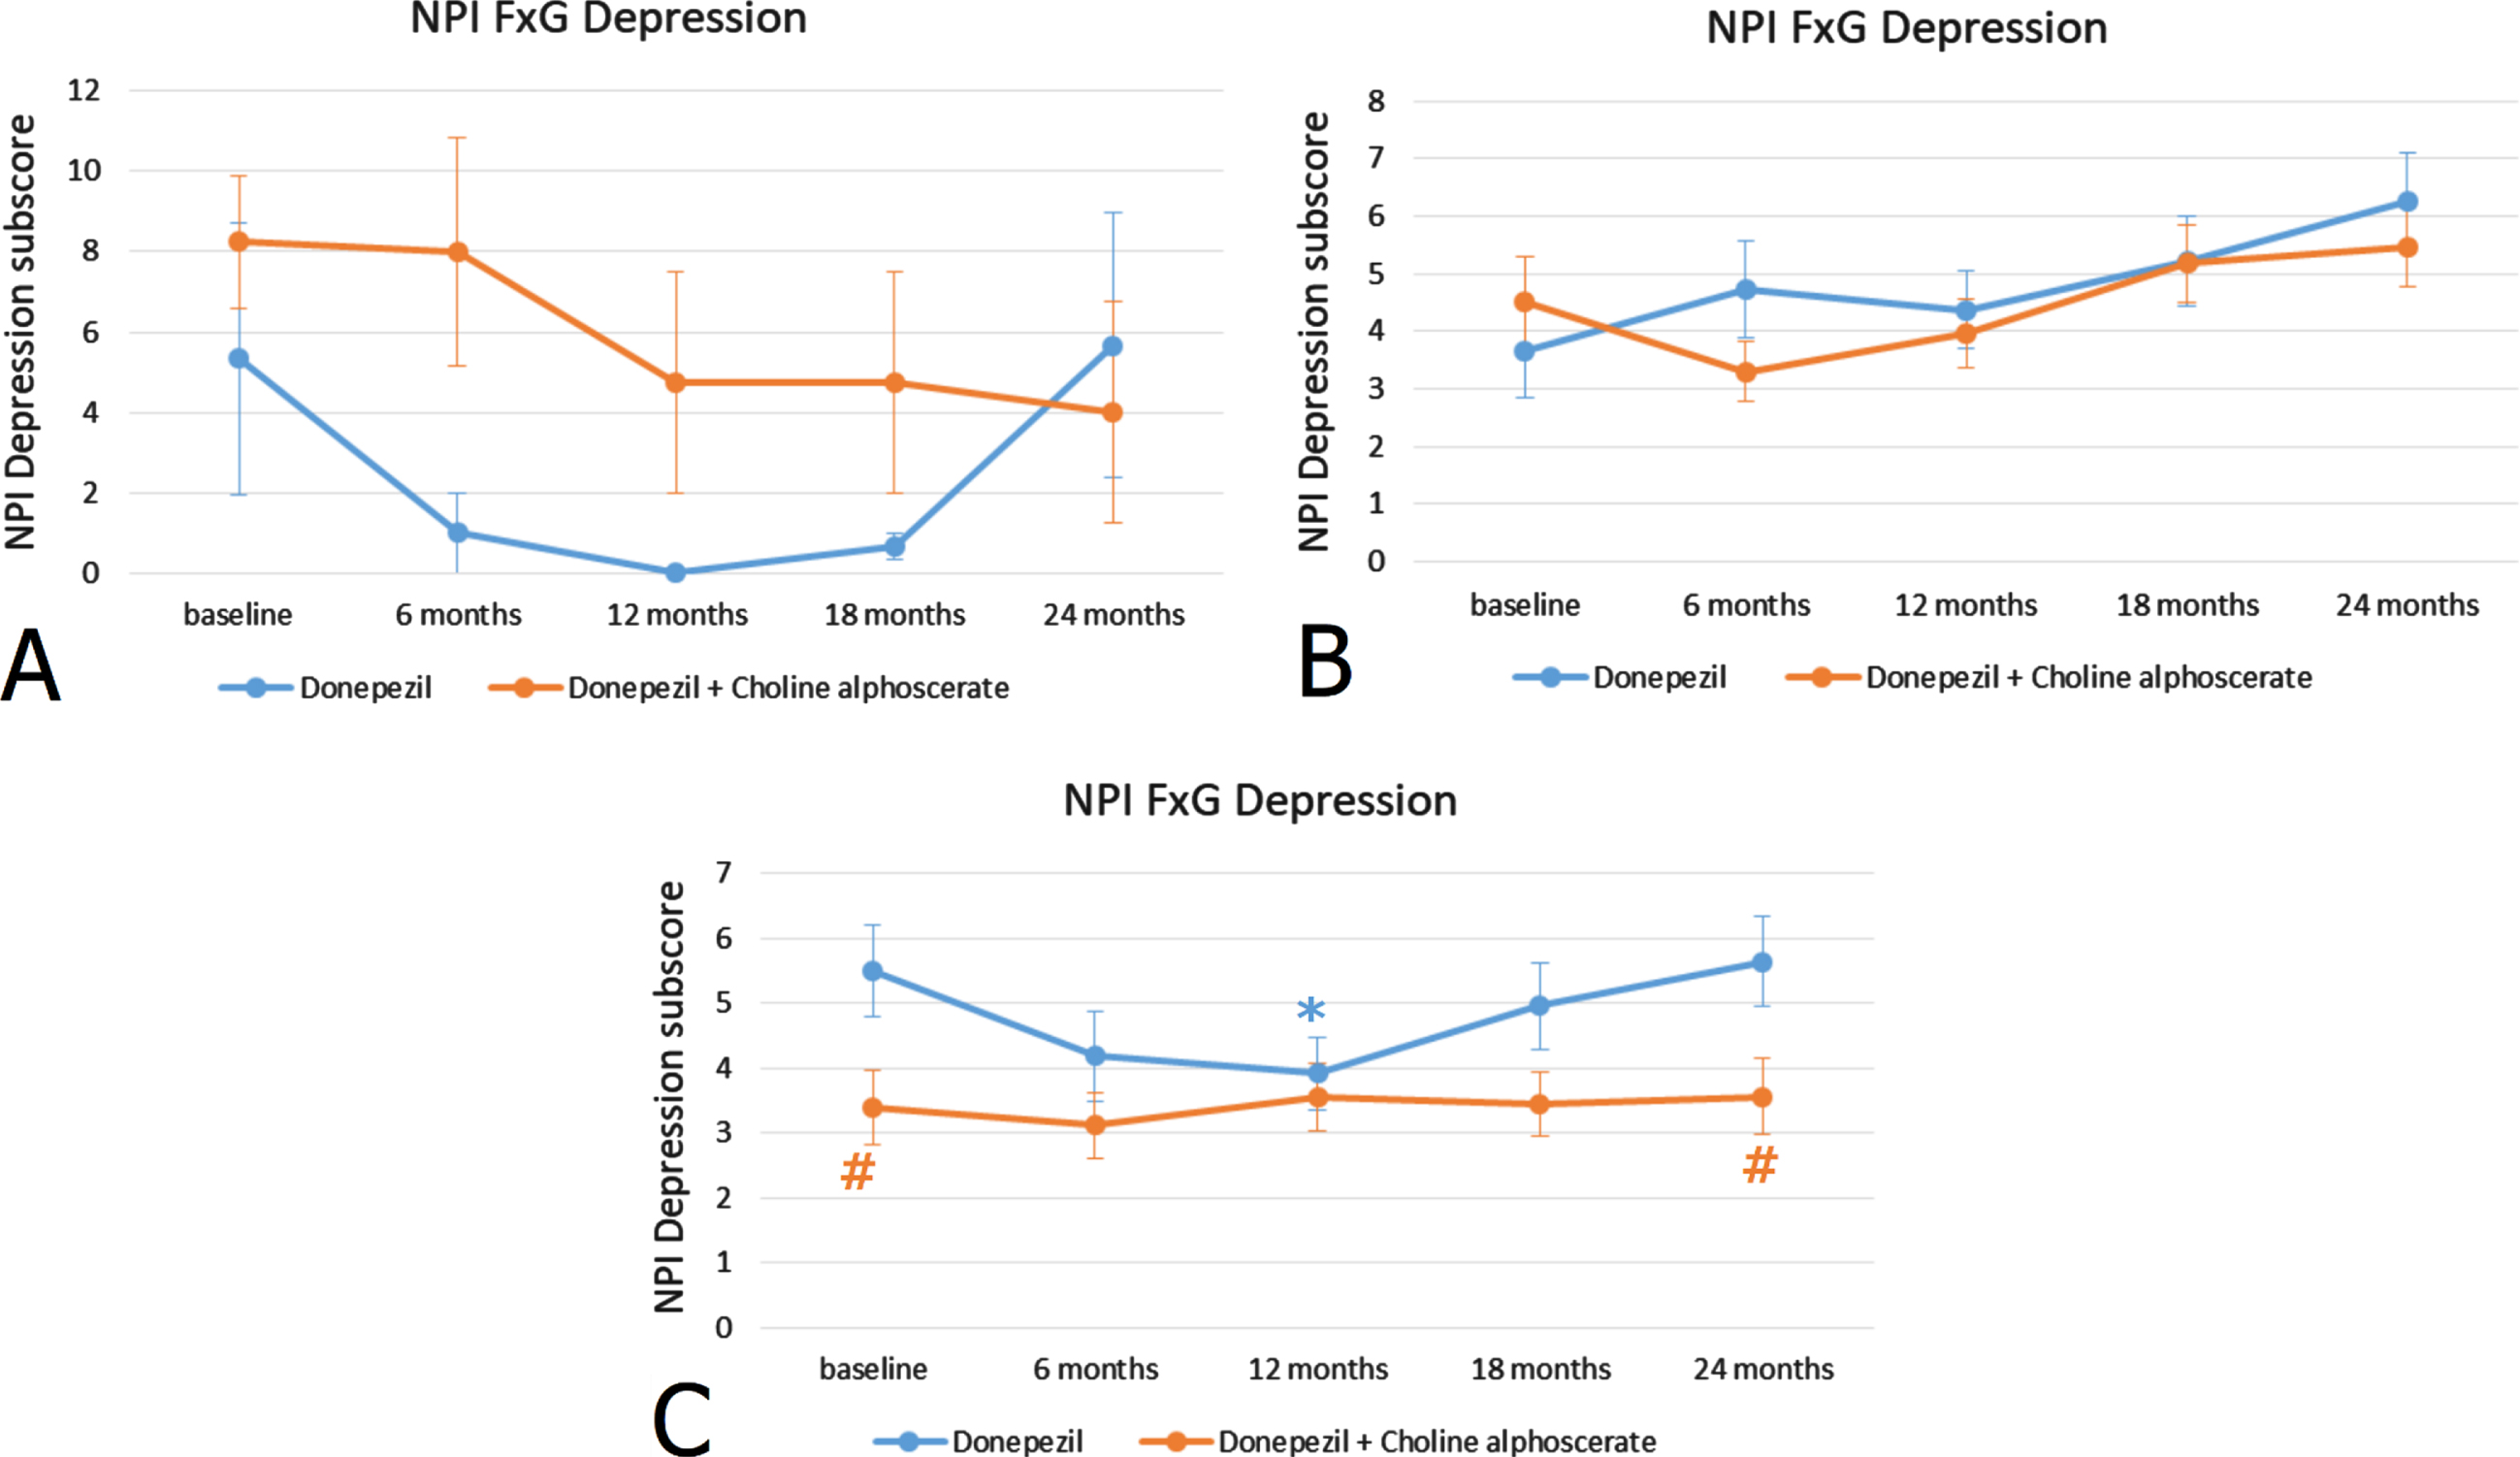 NPI depression subscore (frequency x severity) at the baseline and during the 24 months of observation in AD patients with ADAS-Cog scores 44–60 indicating severe cognitive impairment (A), with ADAS-Cog scores 27–43 indicating moderate cognitive impairment (B) and ADAS-Cog scores 11–26 indicating mild-moderate cognitive impairment (C). *p < 0.05 versus baseline; #p < 0.05 versus monotherapy.